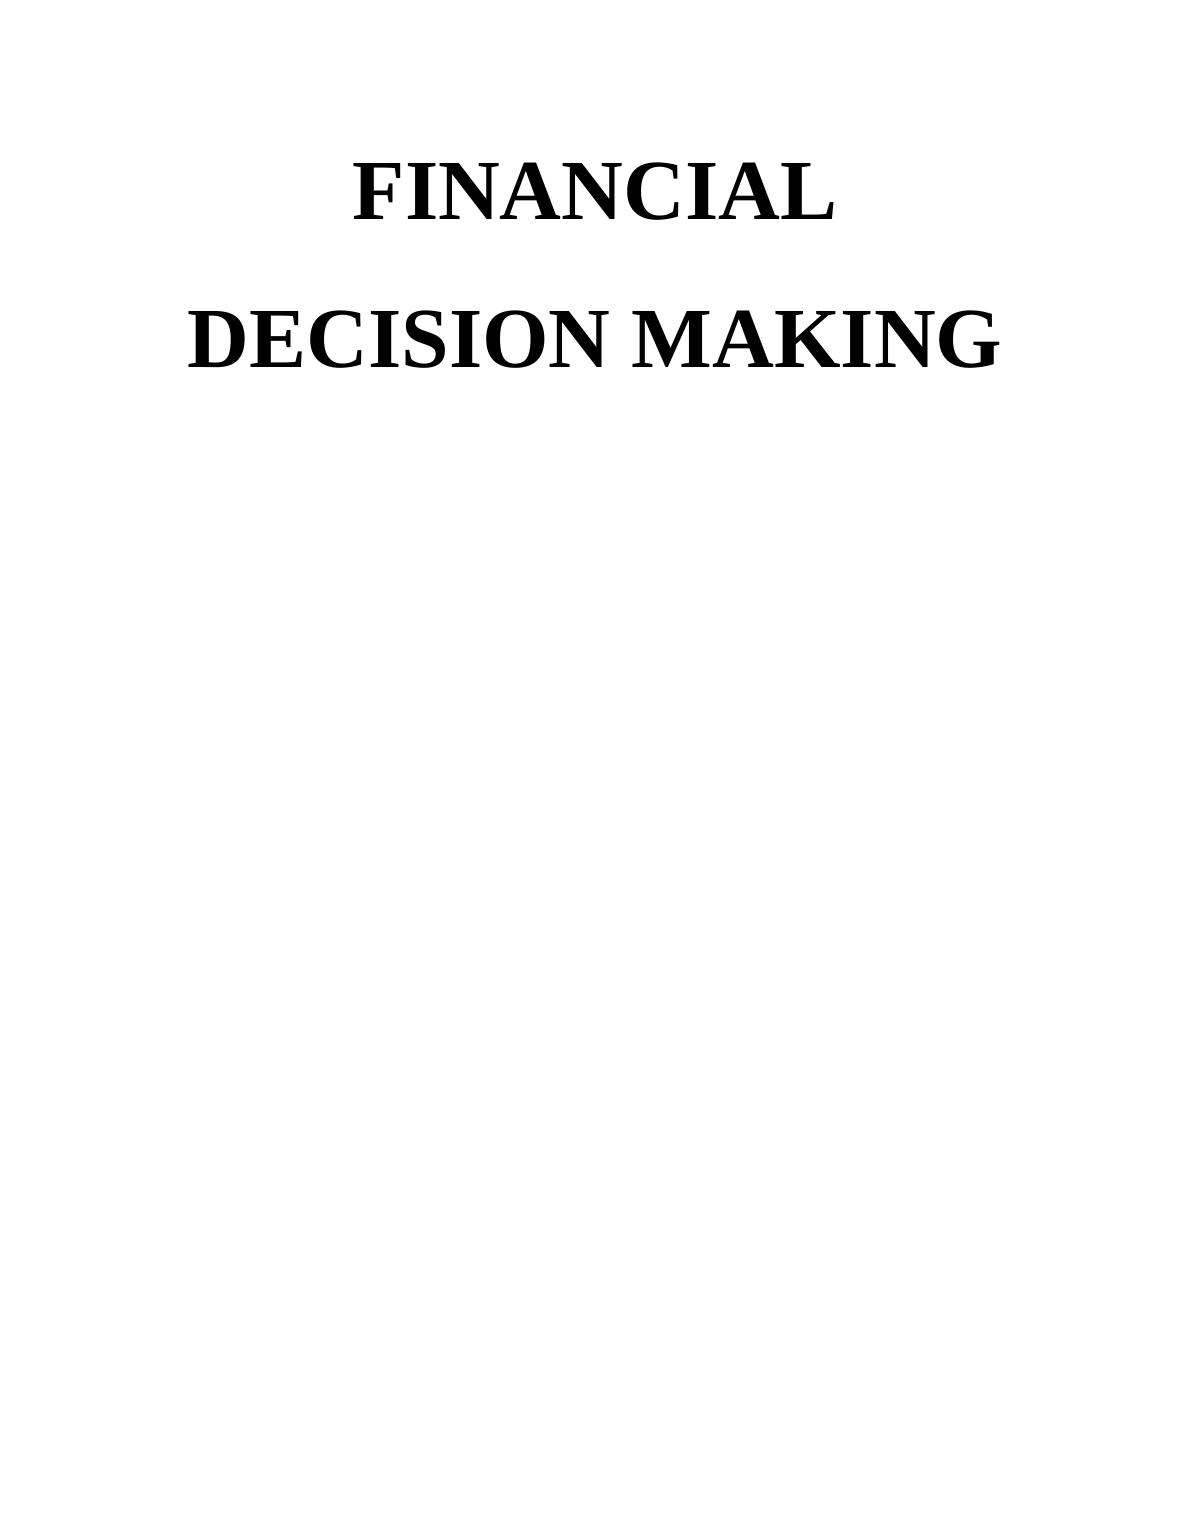 Financial Decision Making_1